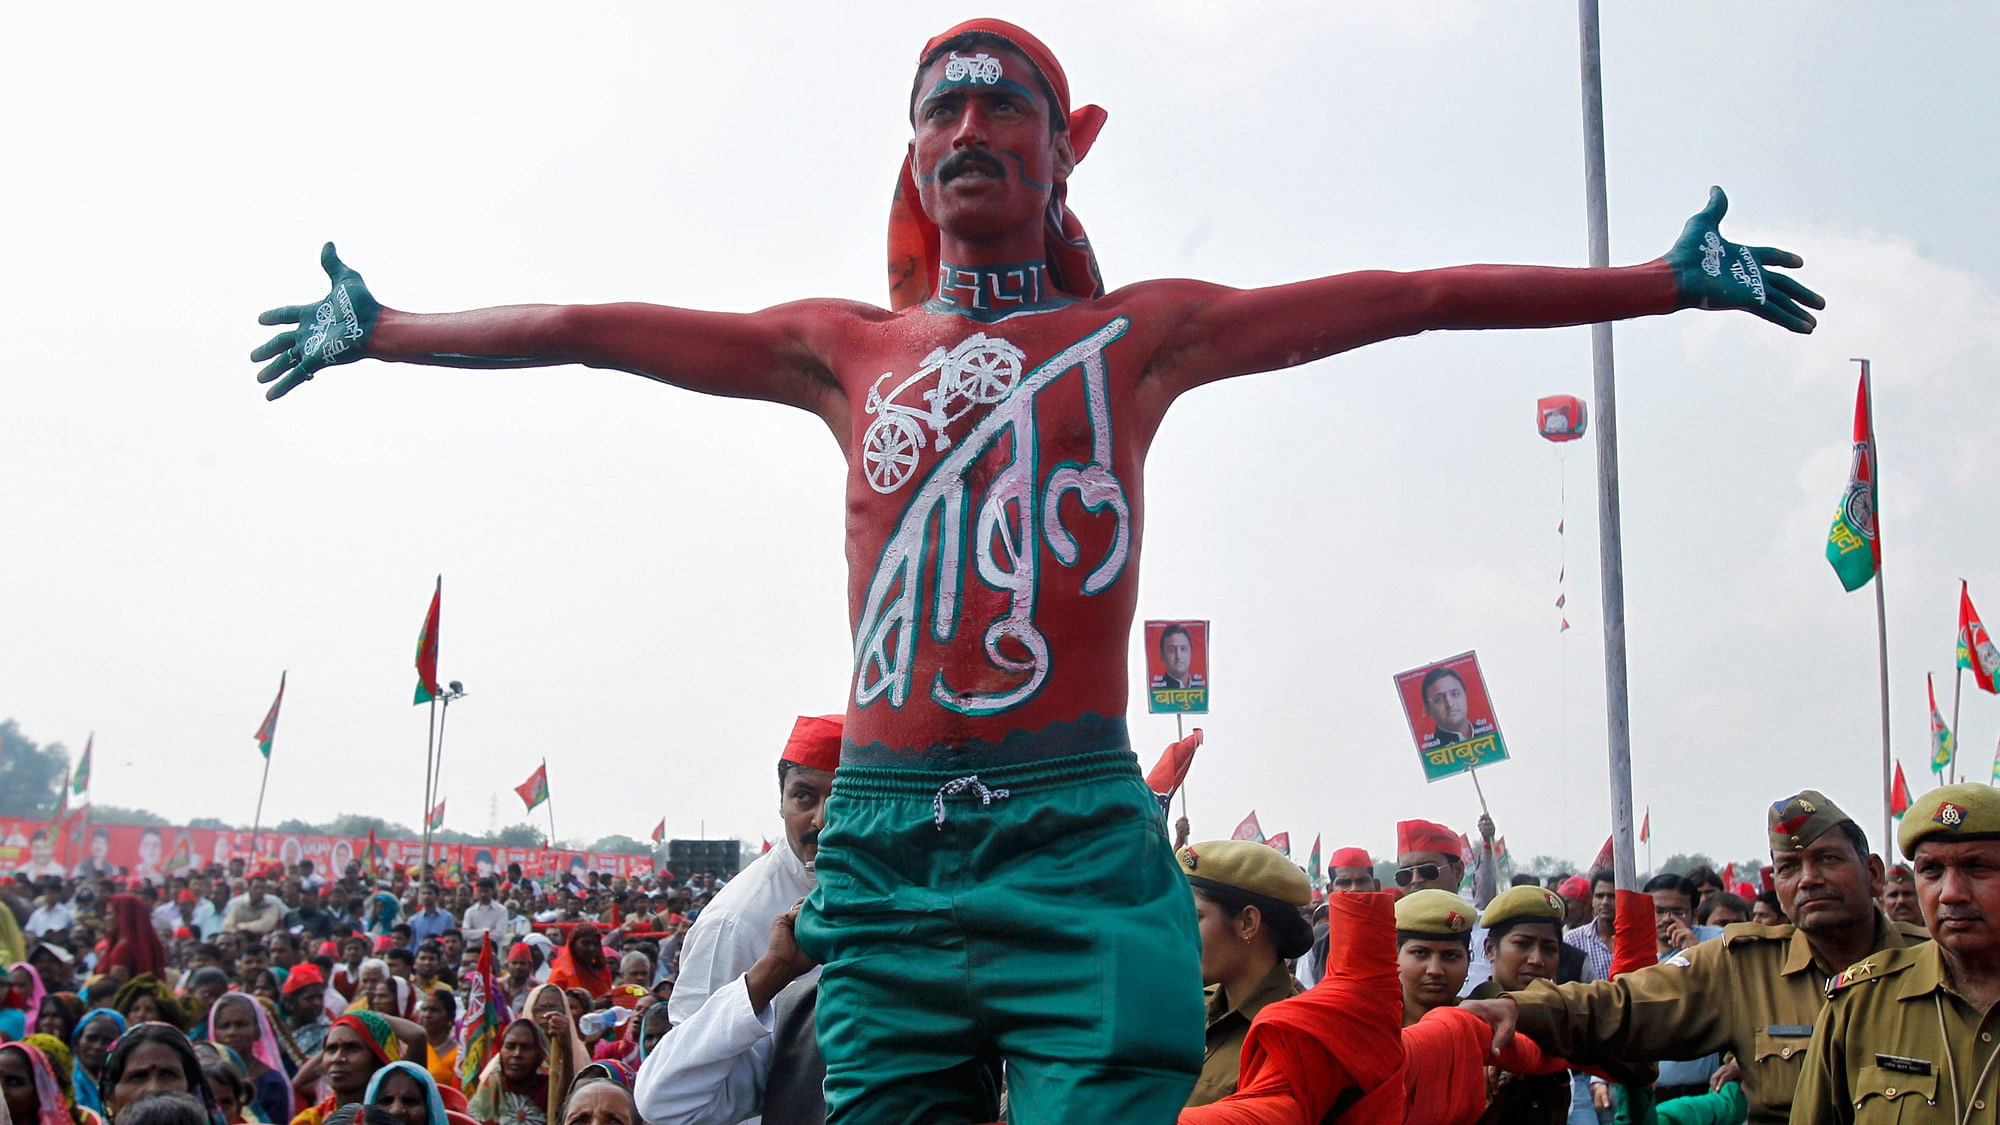 A supporter of Samajwadi Party with his body painted in the colours of the party attends a public rally being addressed by the party chief Mulayam Singh Yadav in Allahabad, March 2, 2014. (Photo: Reuters)